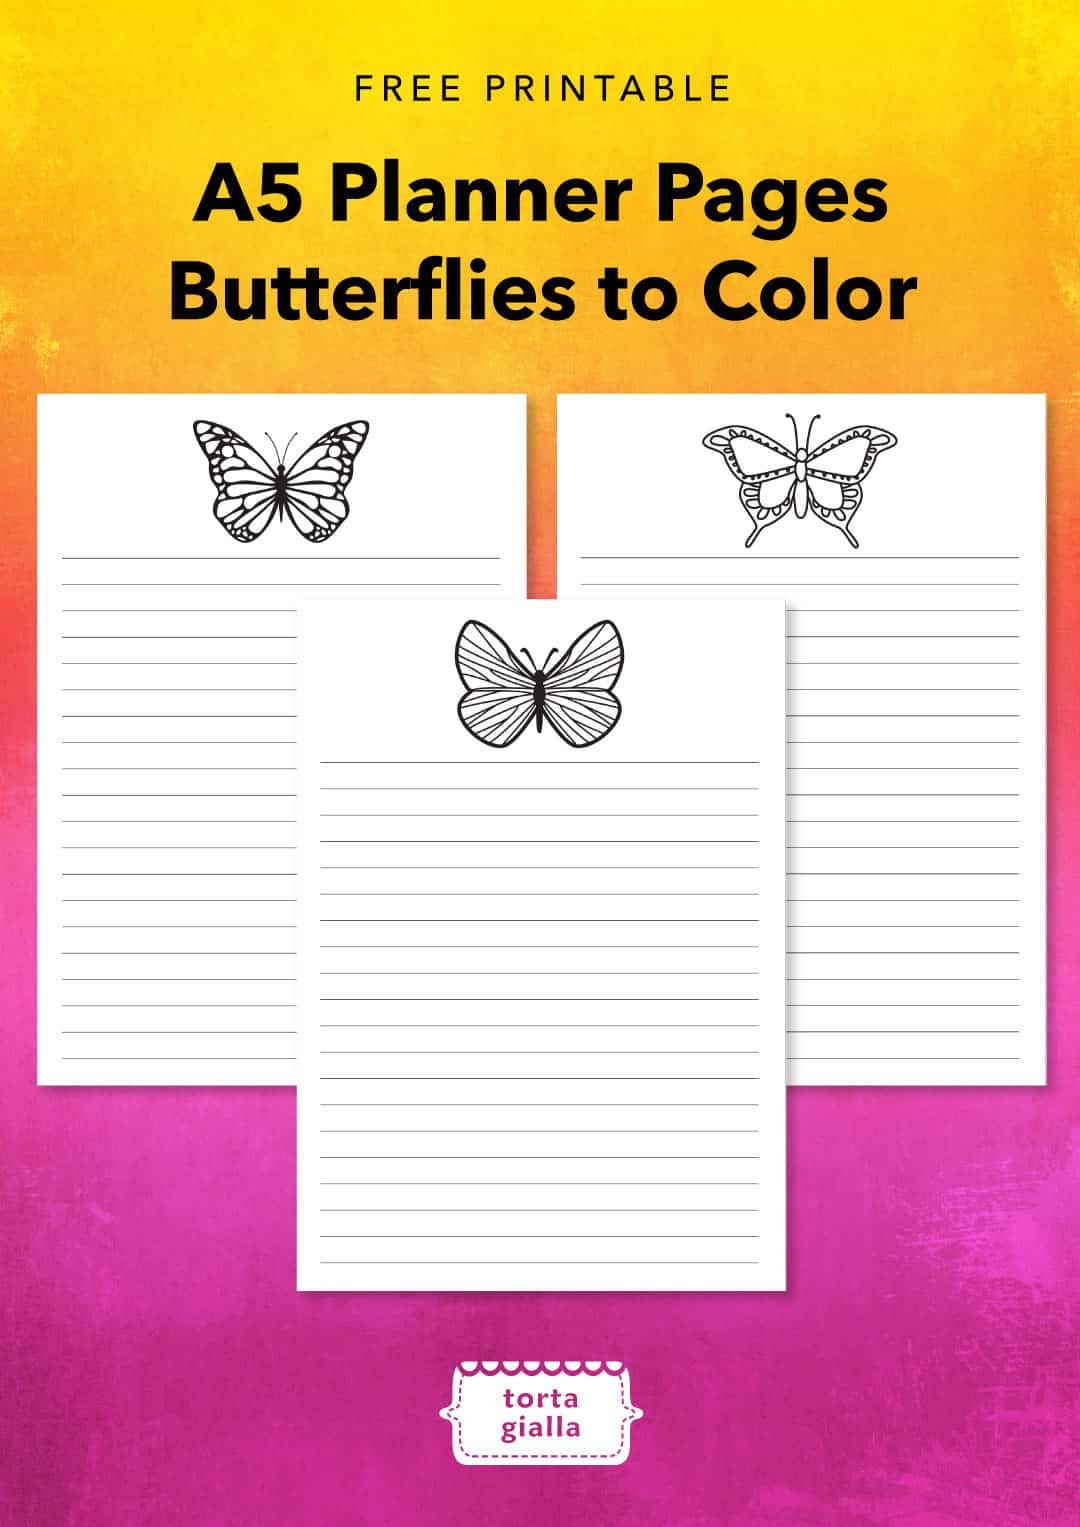 Free Printable - A5 Planner Pages - Butterflies to Color | tortagialla